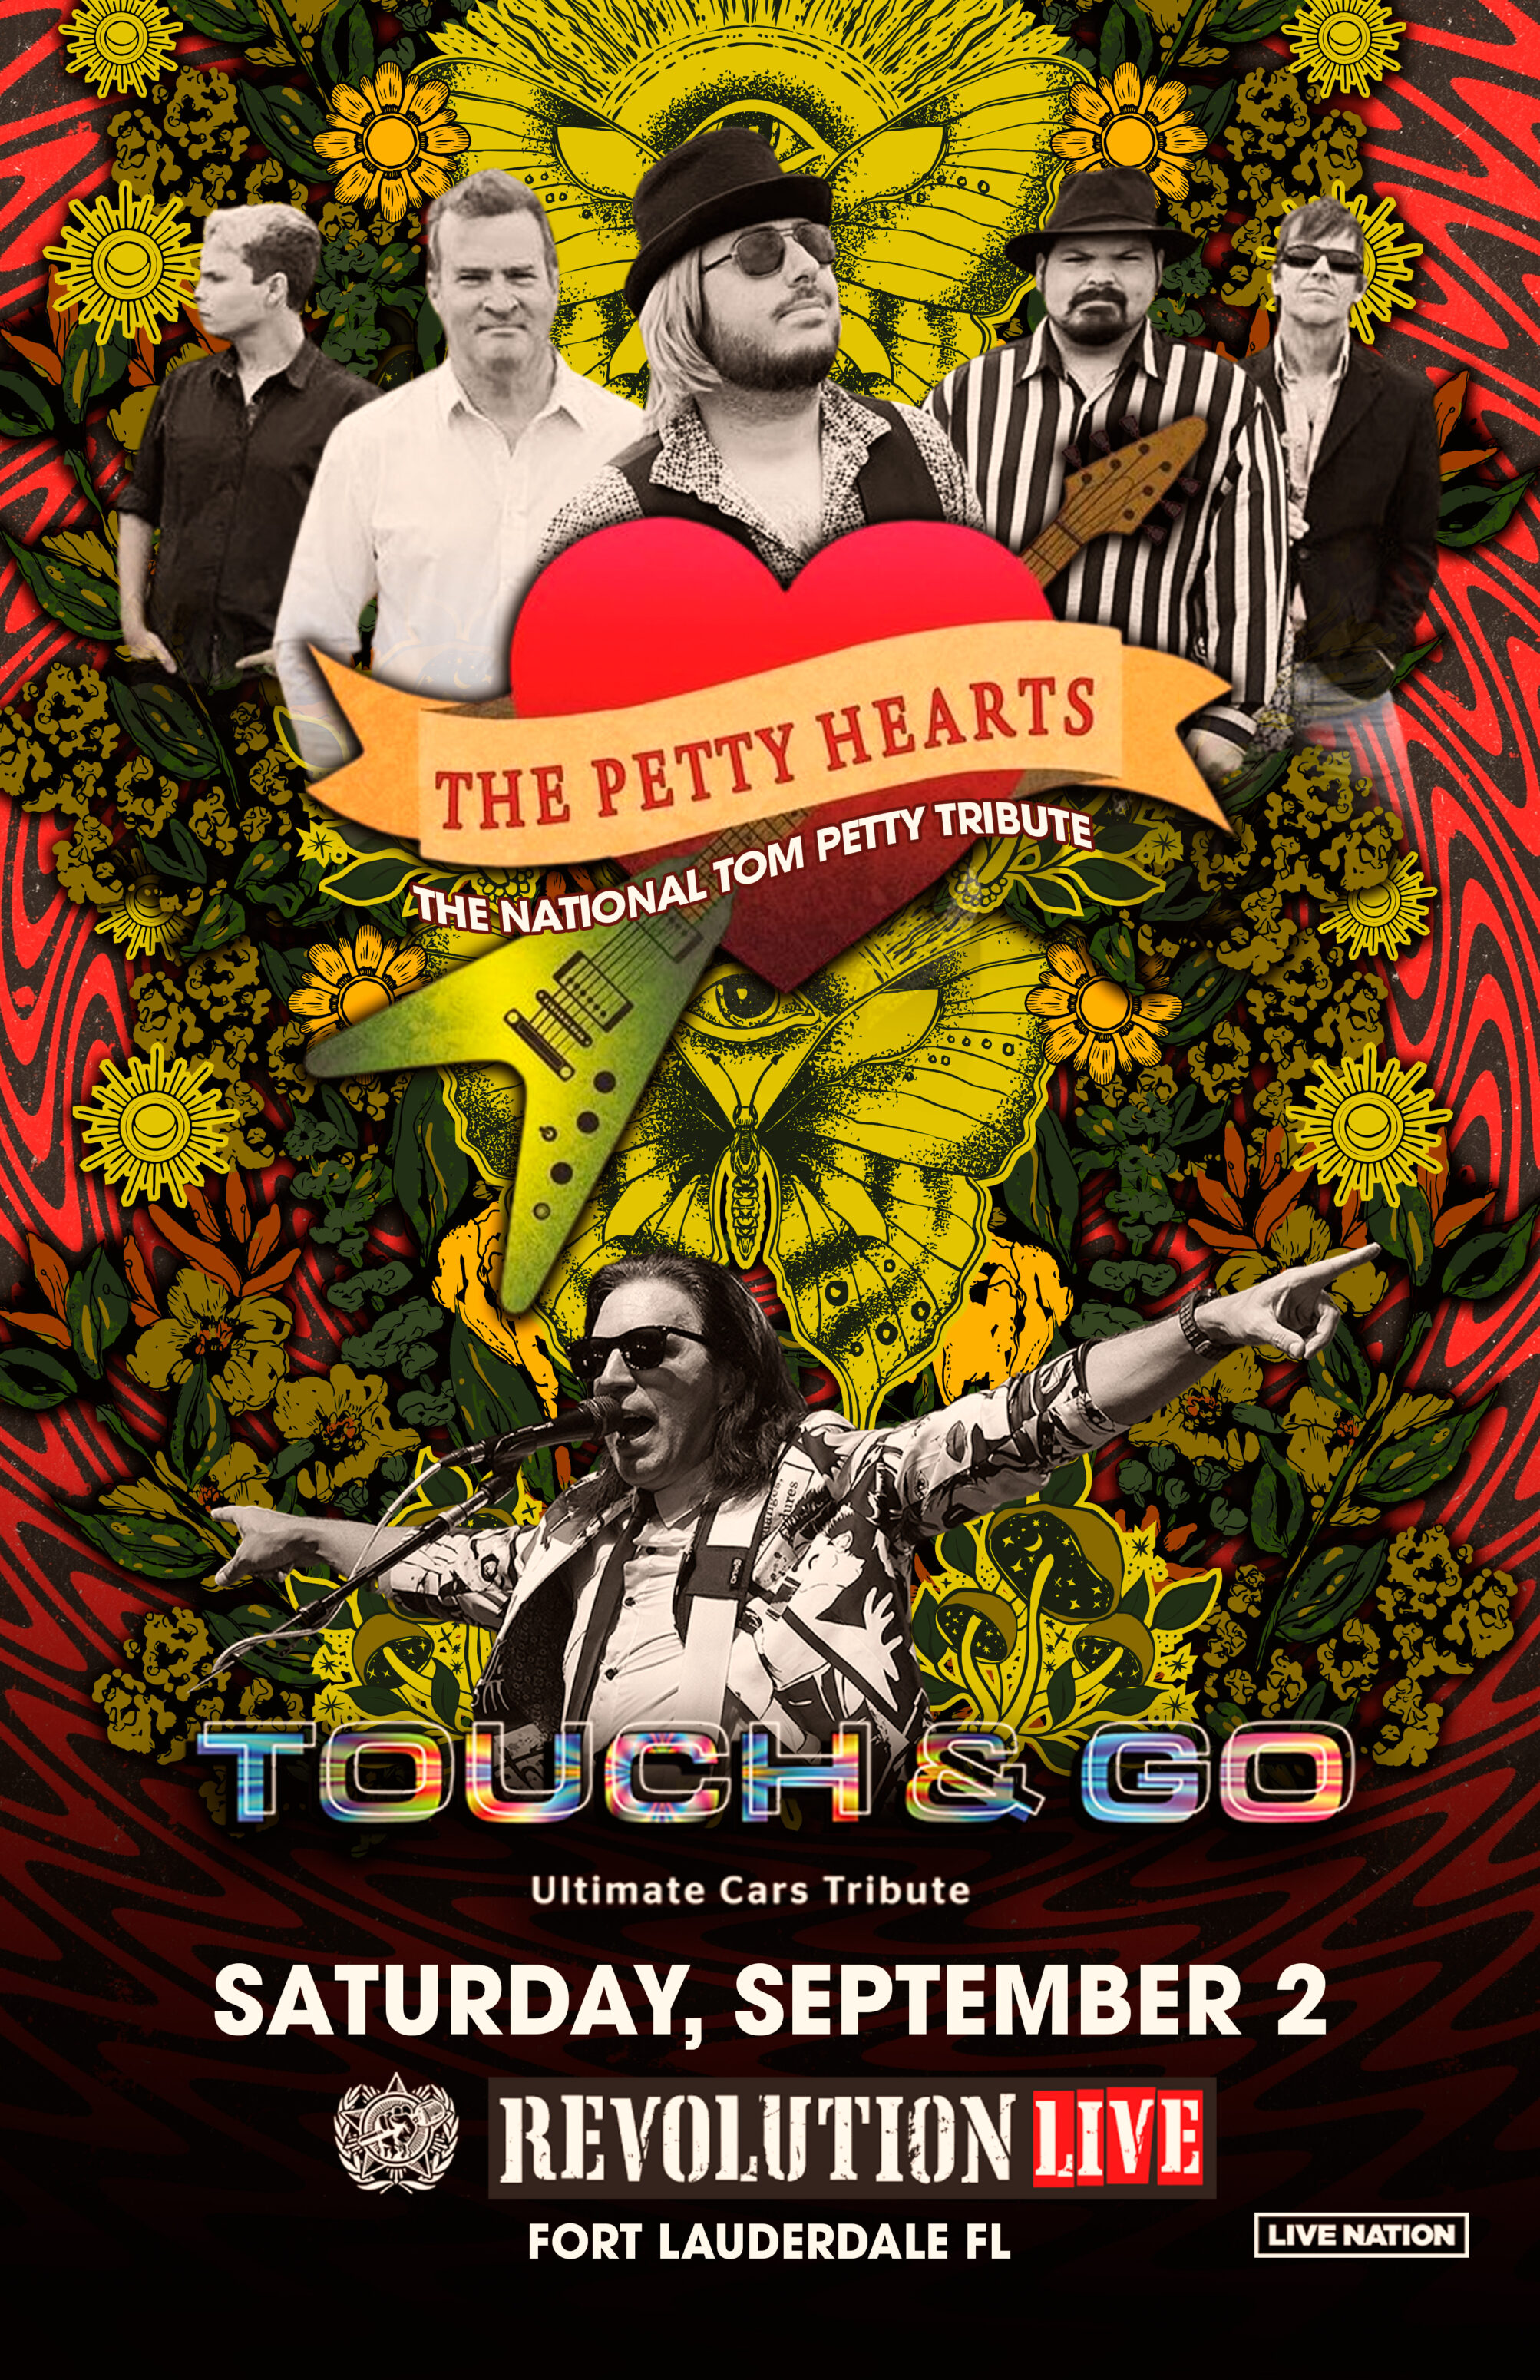 The Petty Hearts - Tom Petty Tribute and Touch & Go - Tribute to The Cars